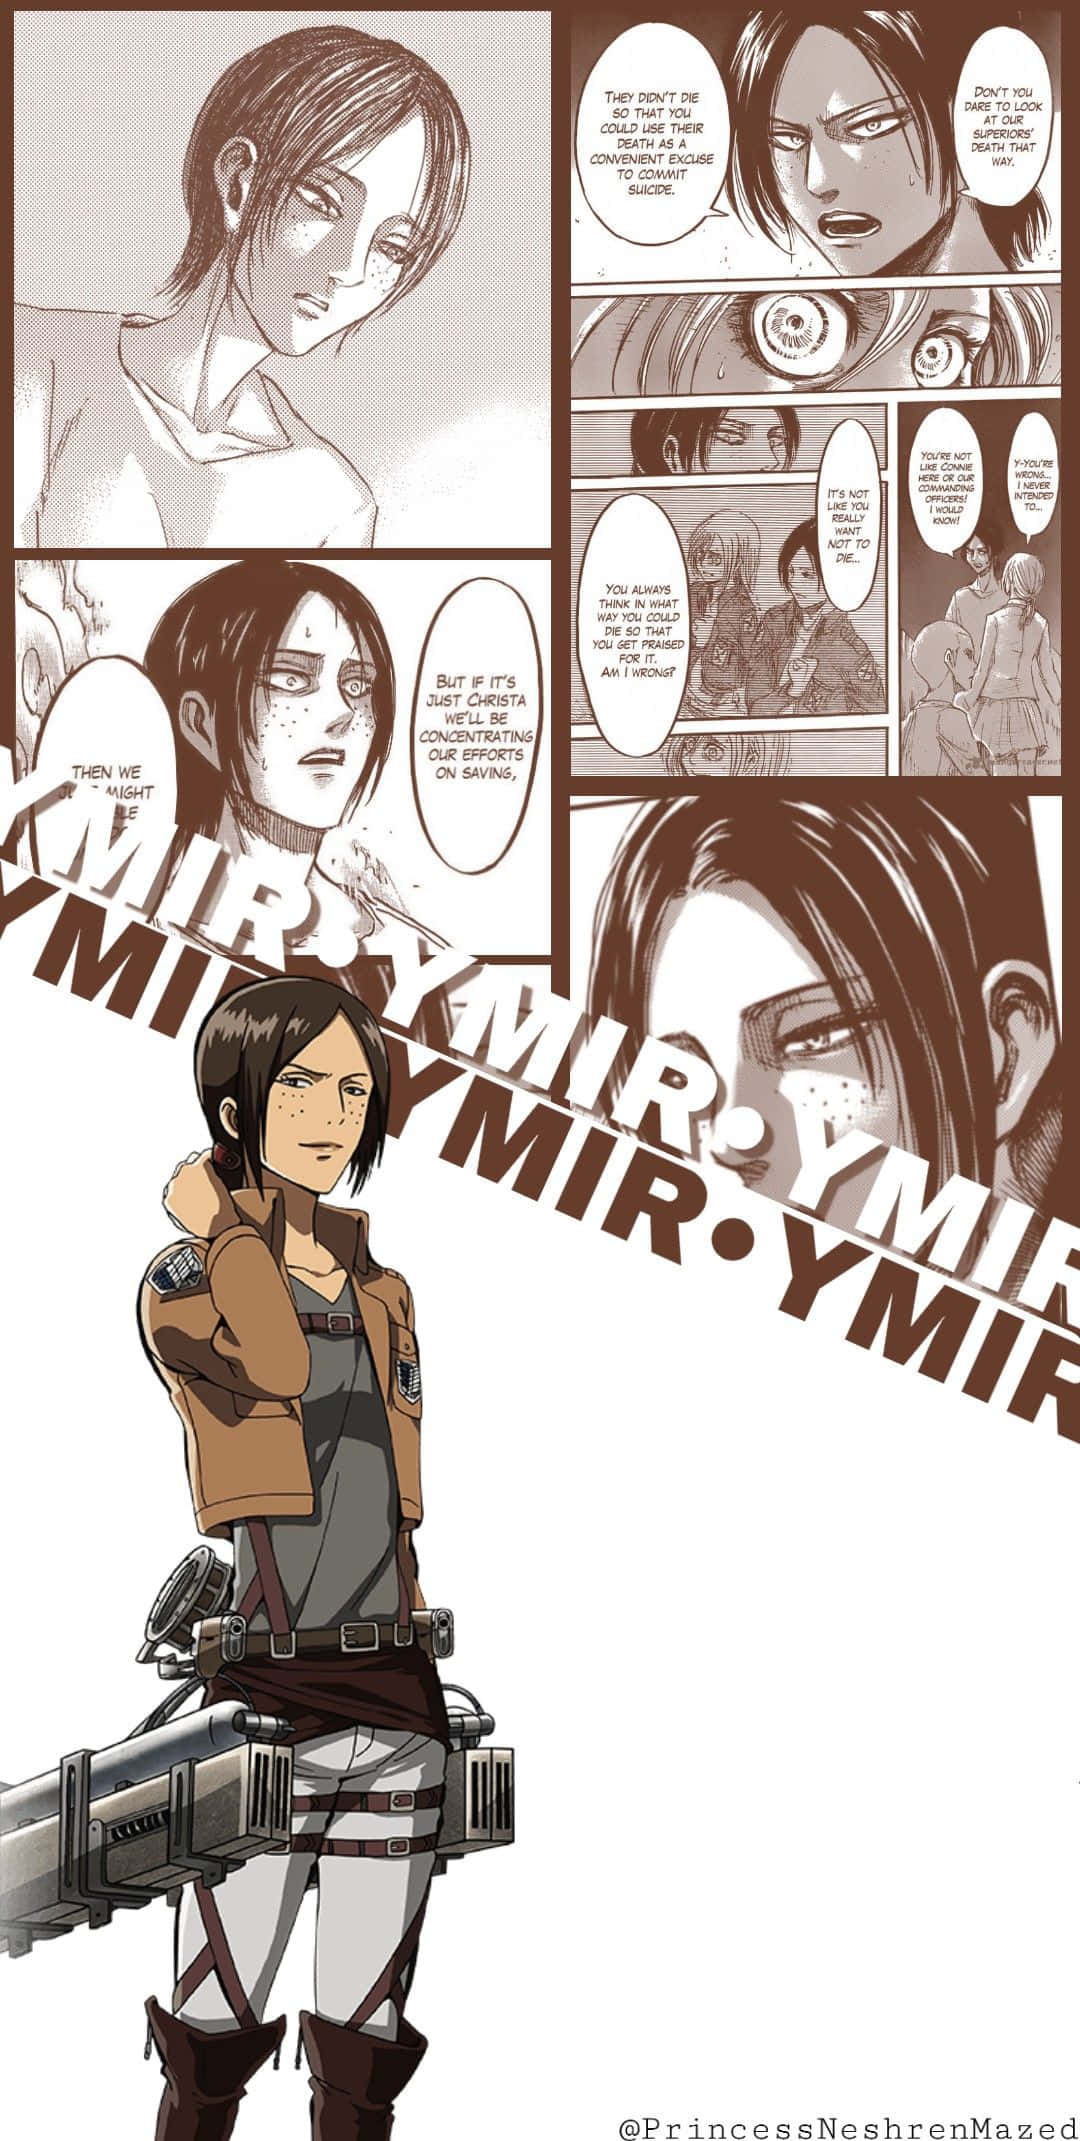 Take a journey through Ymir and explore the mythical Nordic kingdom! Wallpaper